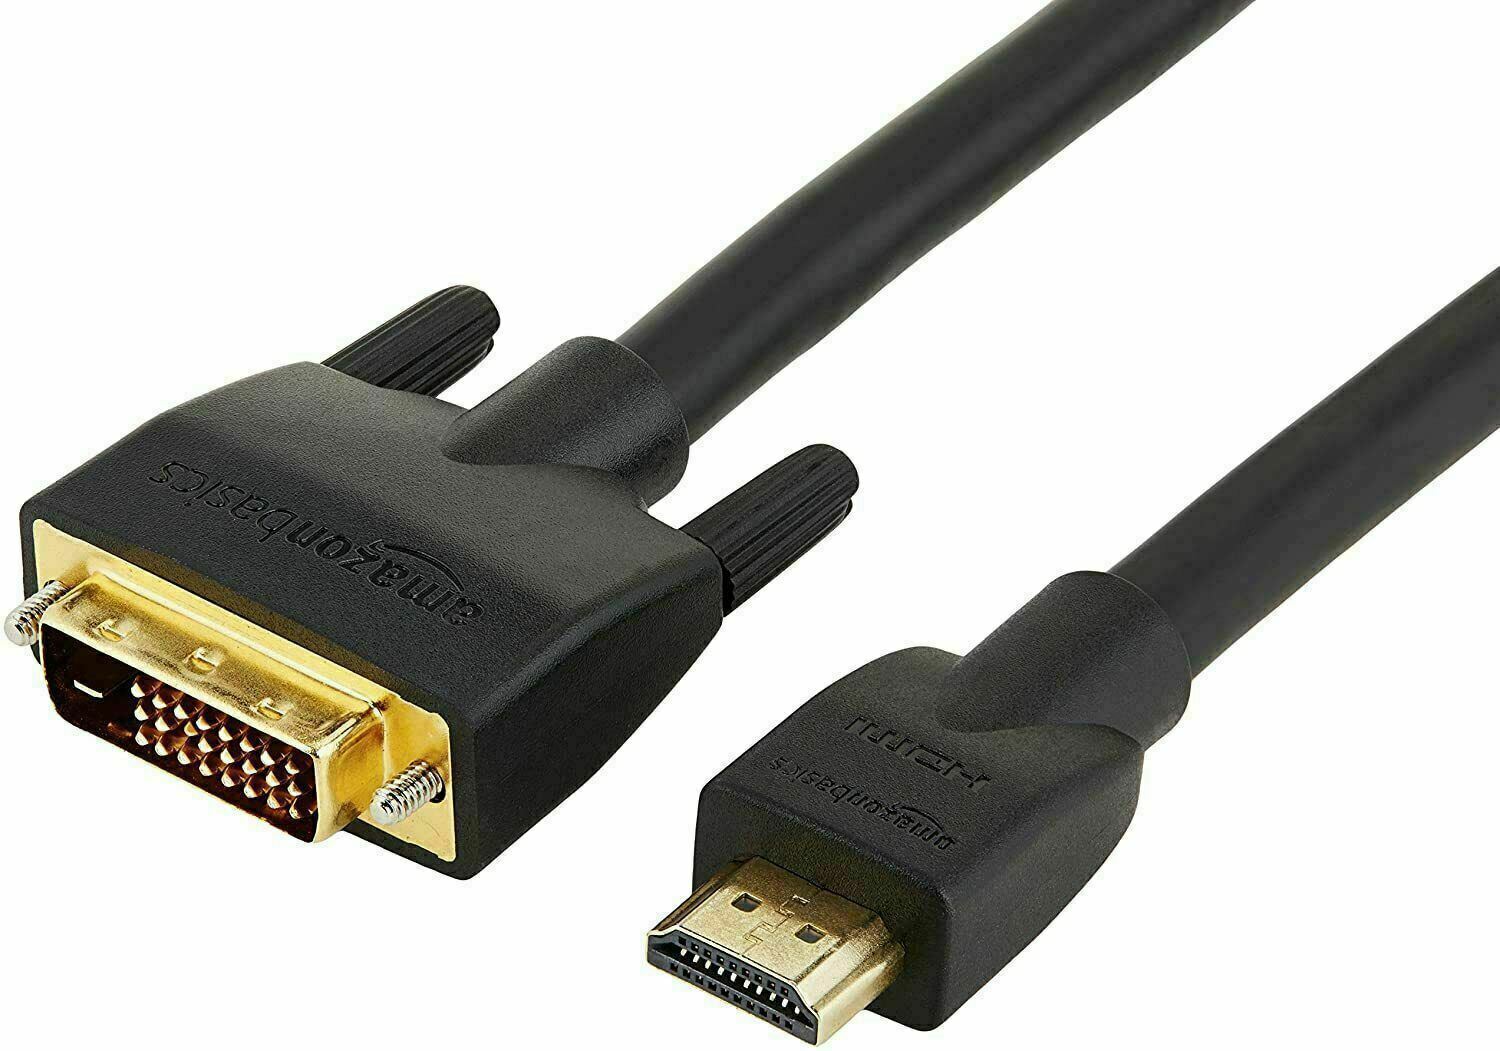 5-PACK AmazonBasics HDMI to DVI 25FT Cables, Black, Gold-Plated Connectors